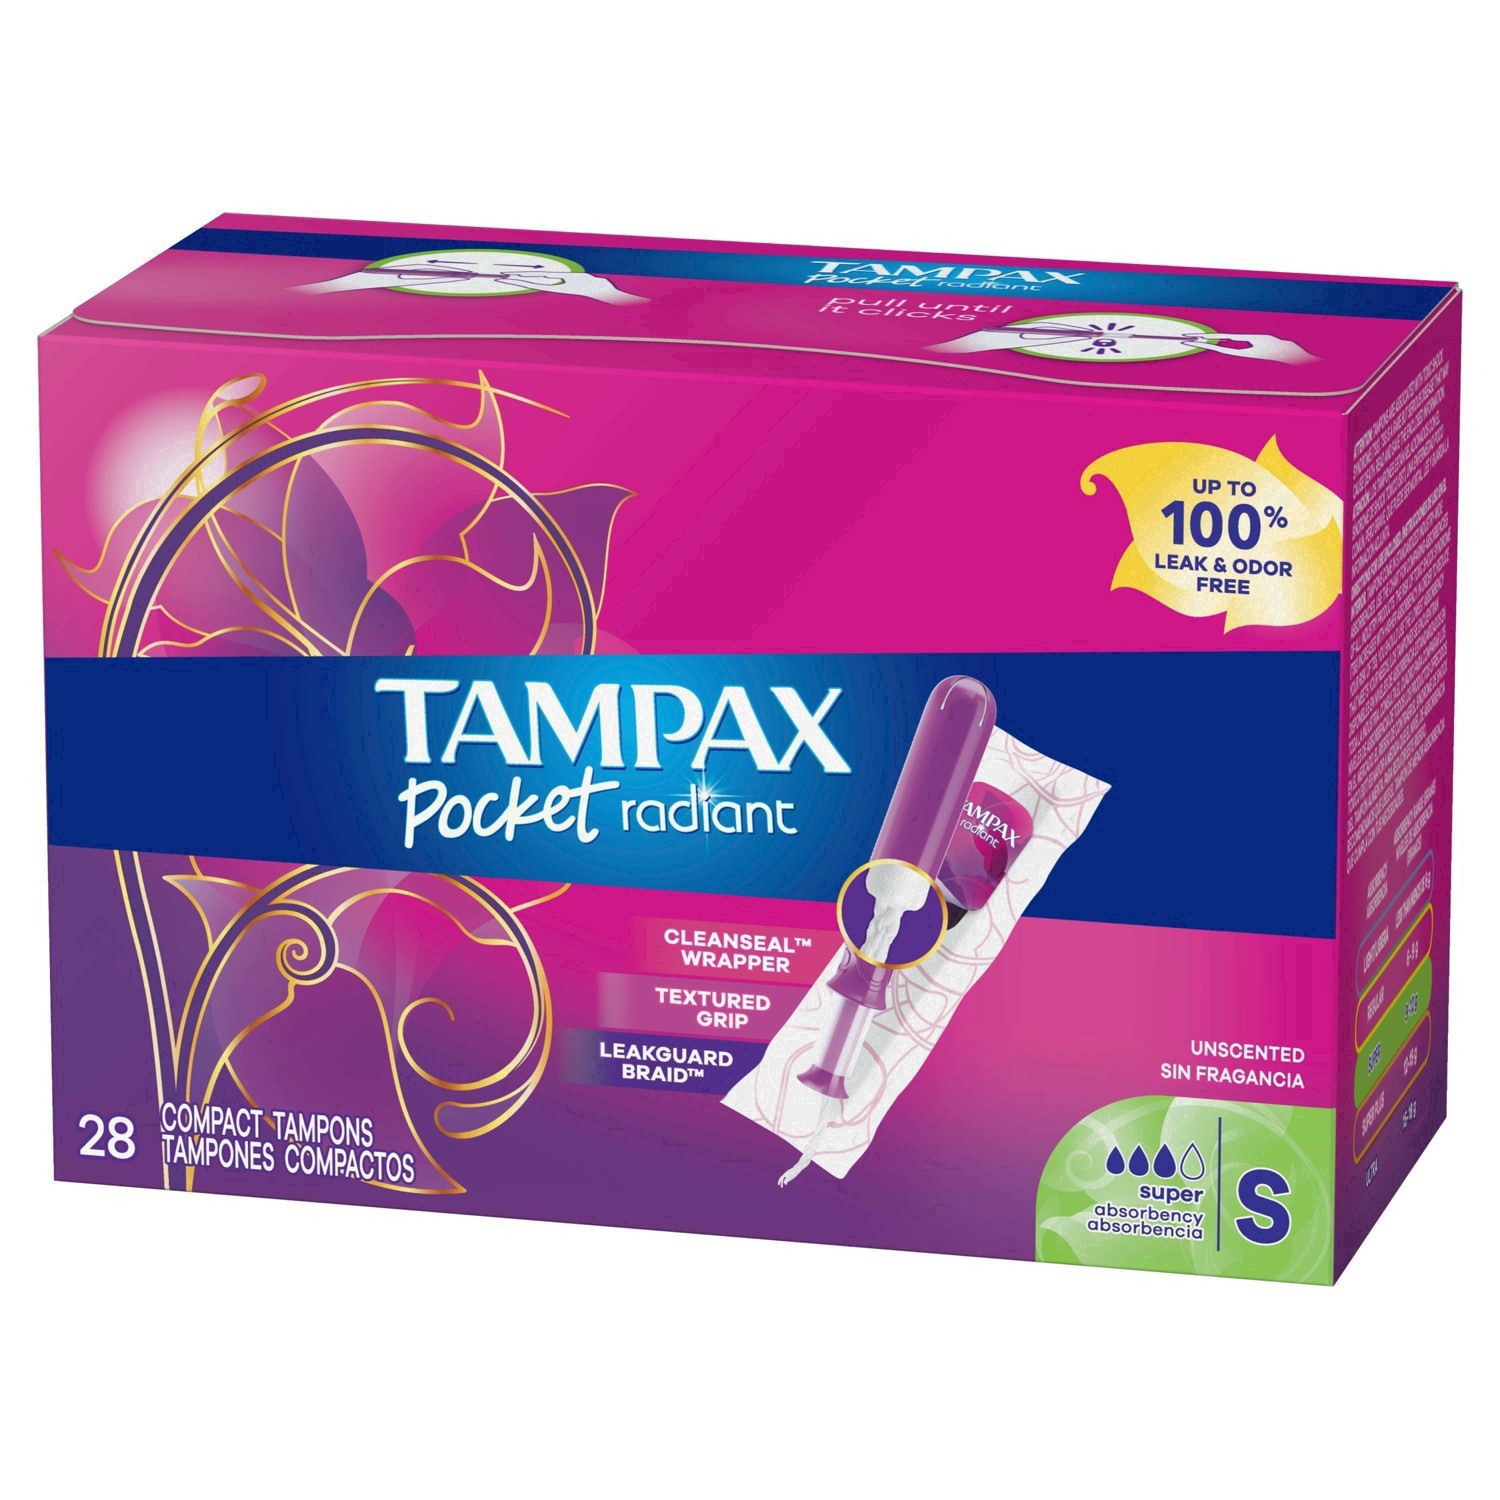 slide 42 of 94, Tampax Pocket Radiant Compact Plastic Tampons, With LeakGuard Braid, Super Absorbency, Unscented, 28 Count, 28 ct